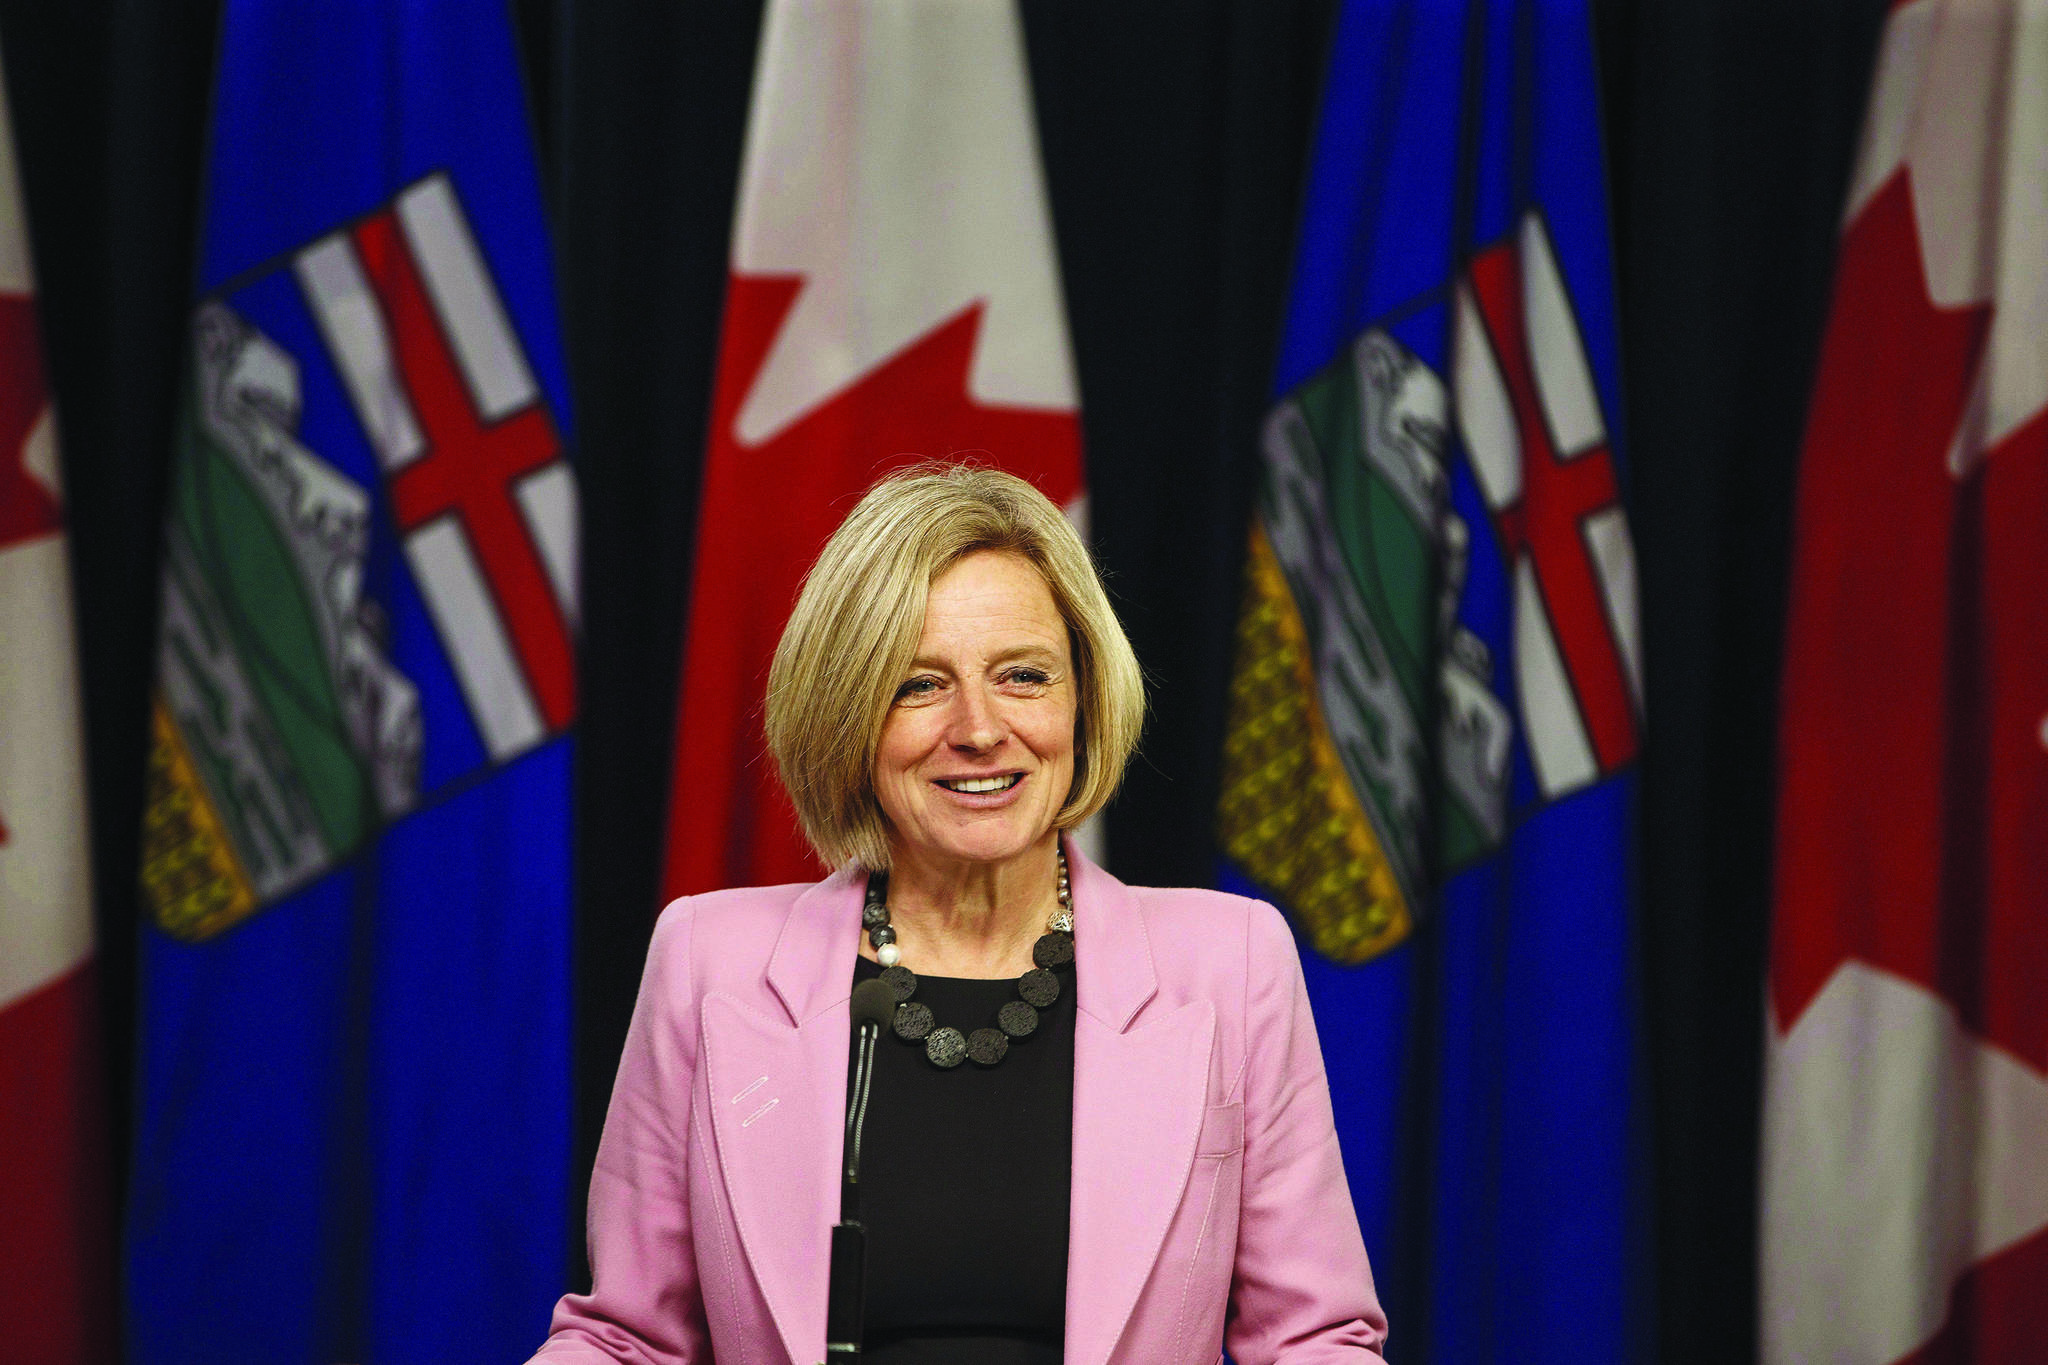 Alberta Premier Rachel Notley speaks to media before the Speech from the Throne, in Edmonton on March 8, 2018. THE CANADIAN PRESS/Jason Franson